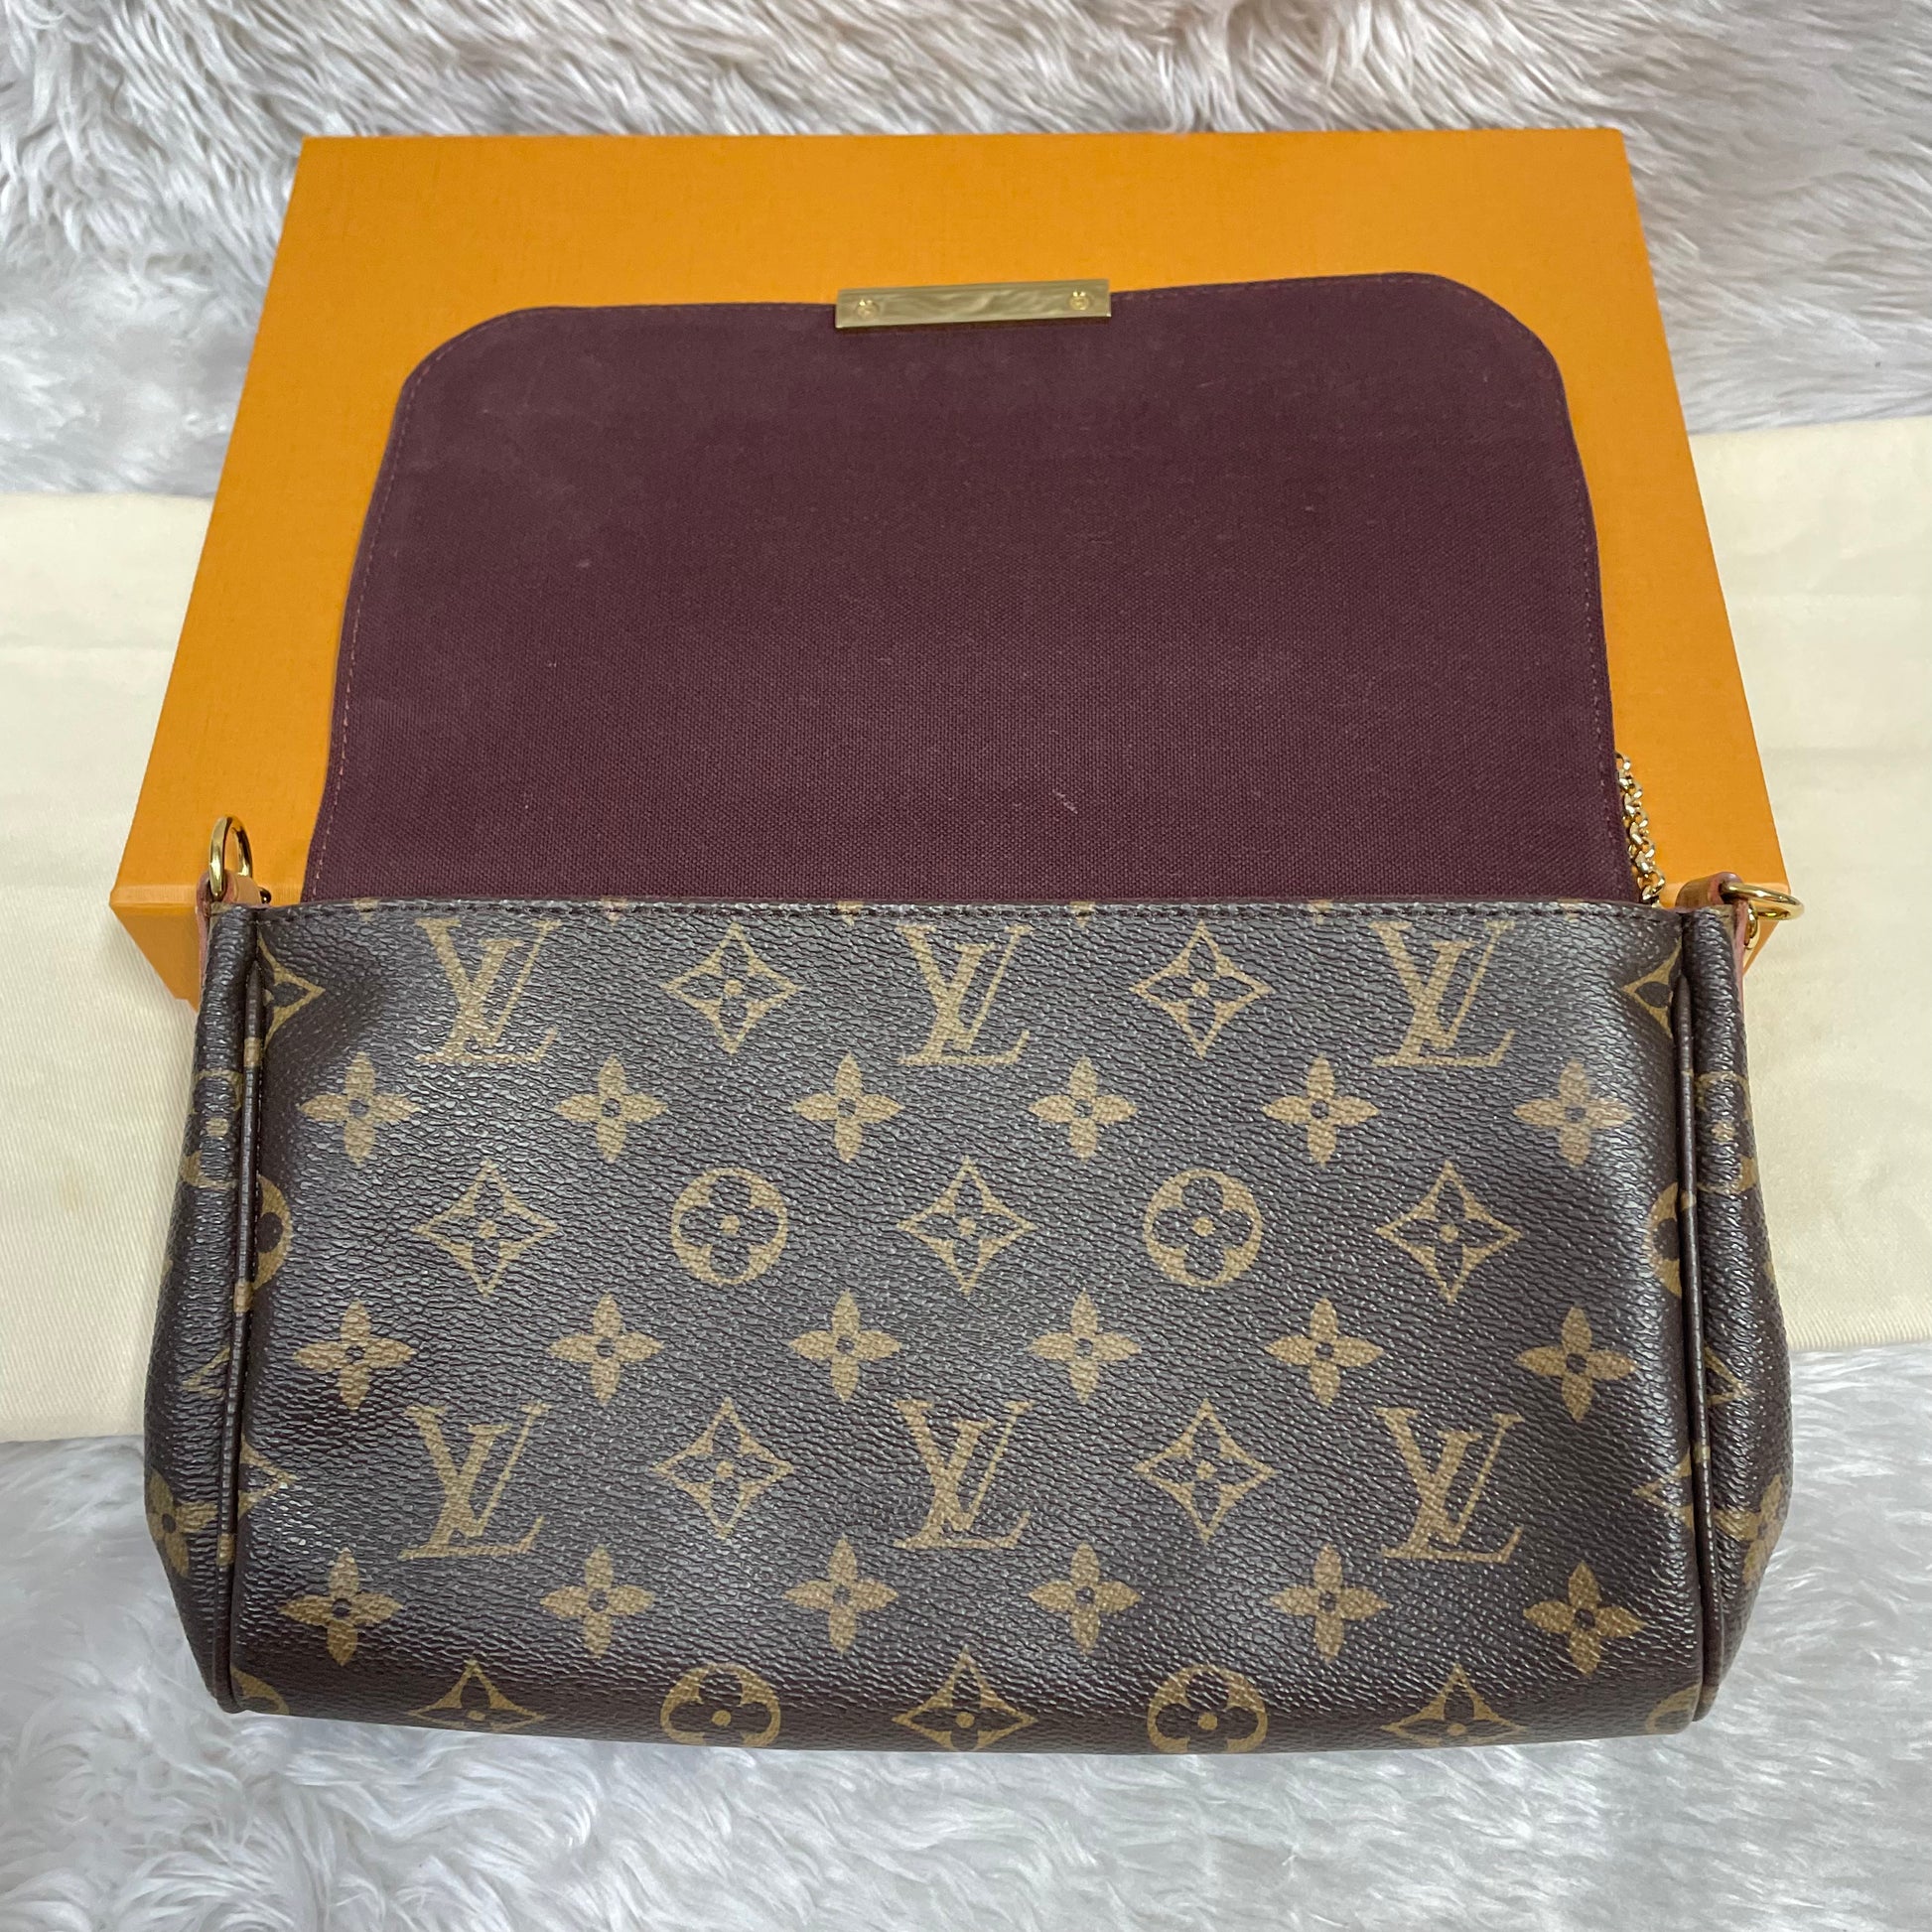 Authentic Favorite mm monogram with dust bag and box (SA4198 date